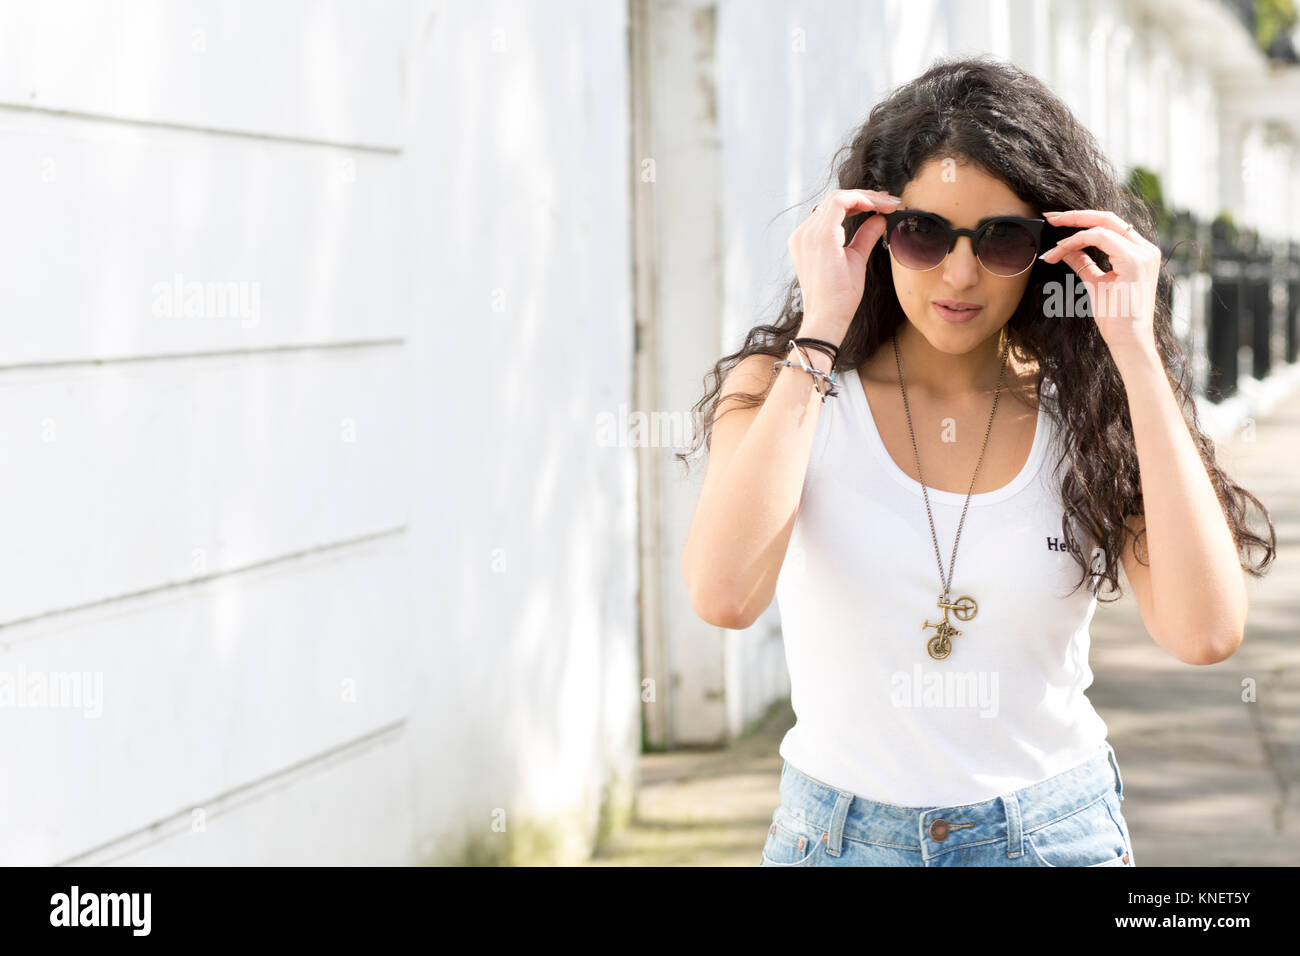 Young woman with long wavy hair strolling on street putting on sunglasses Stock Photo